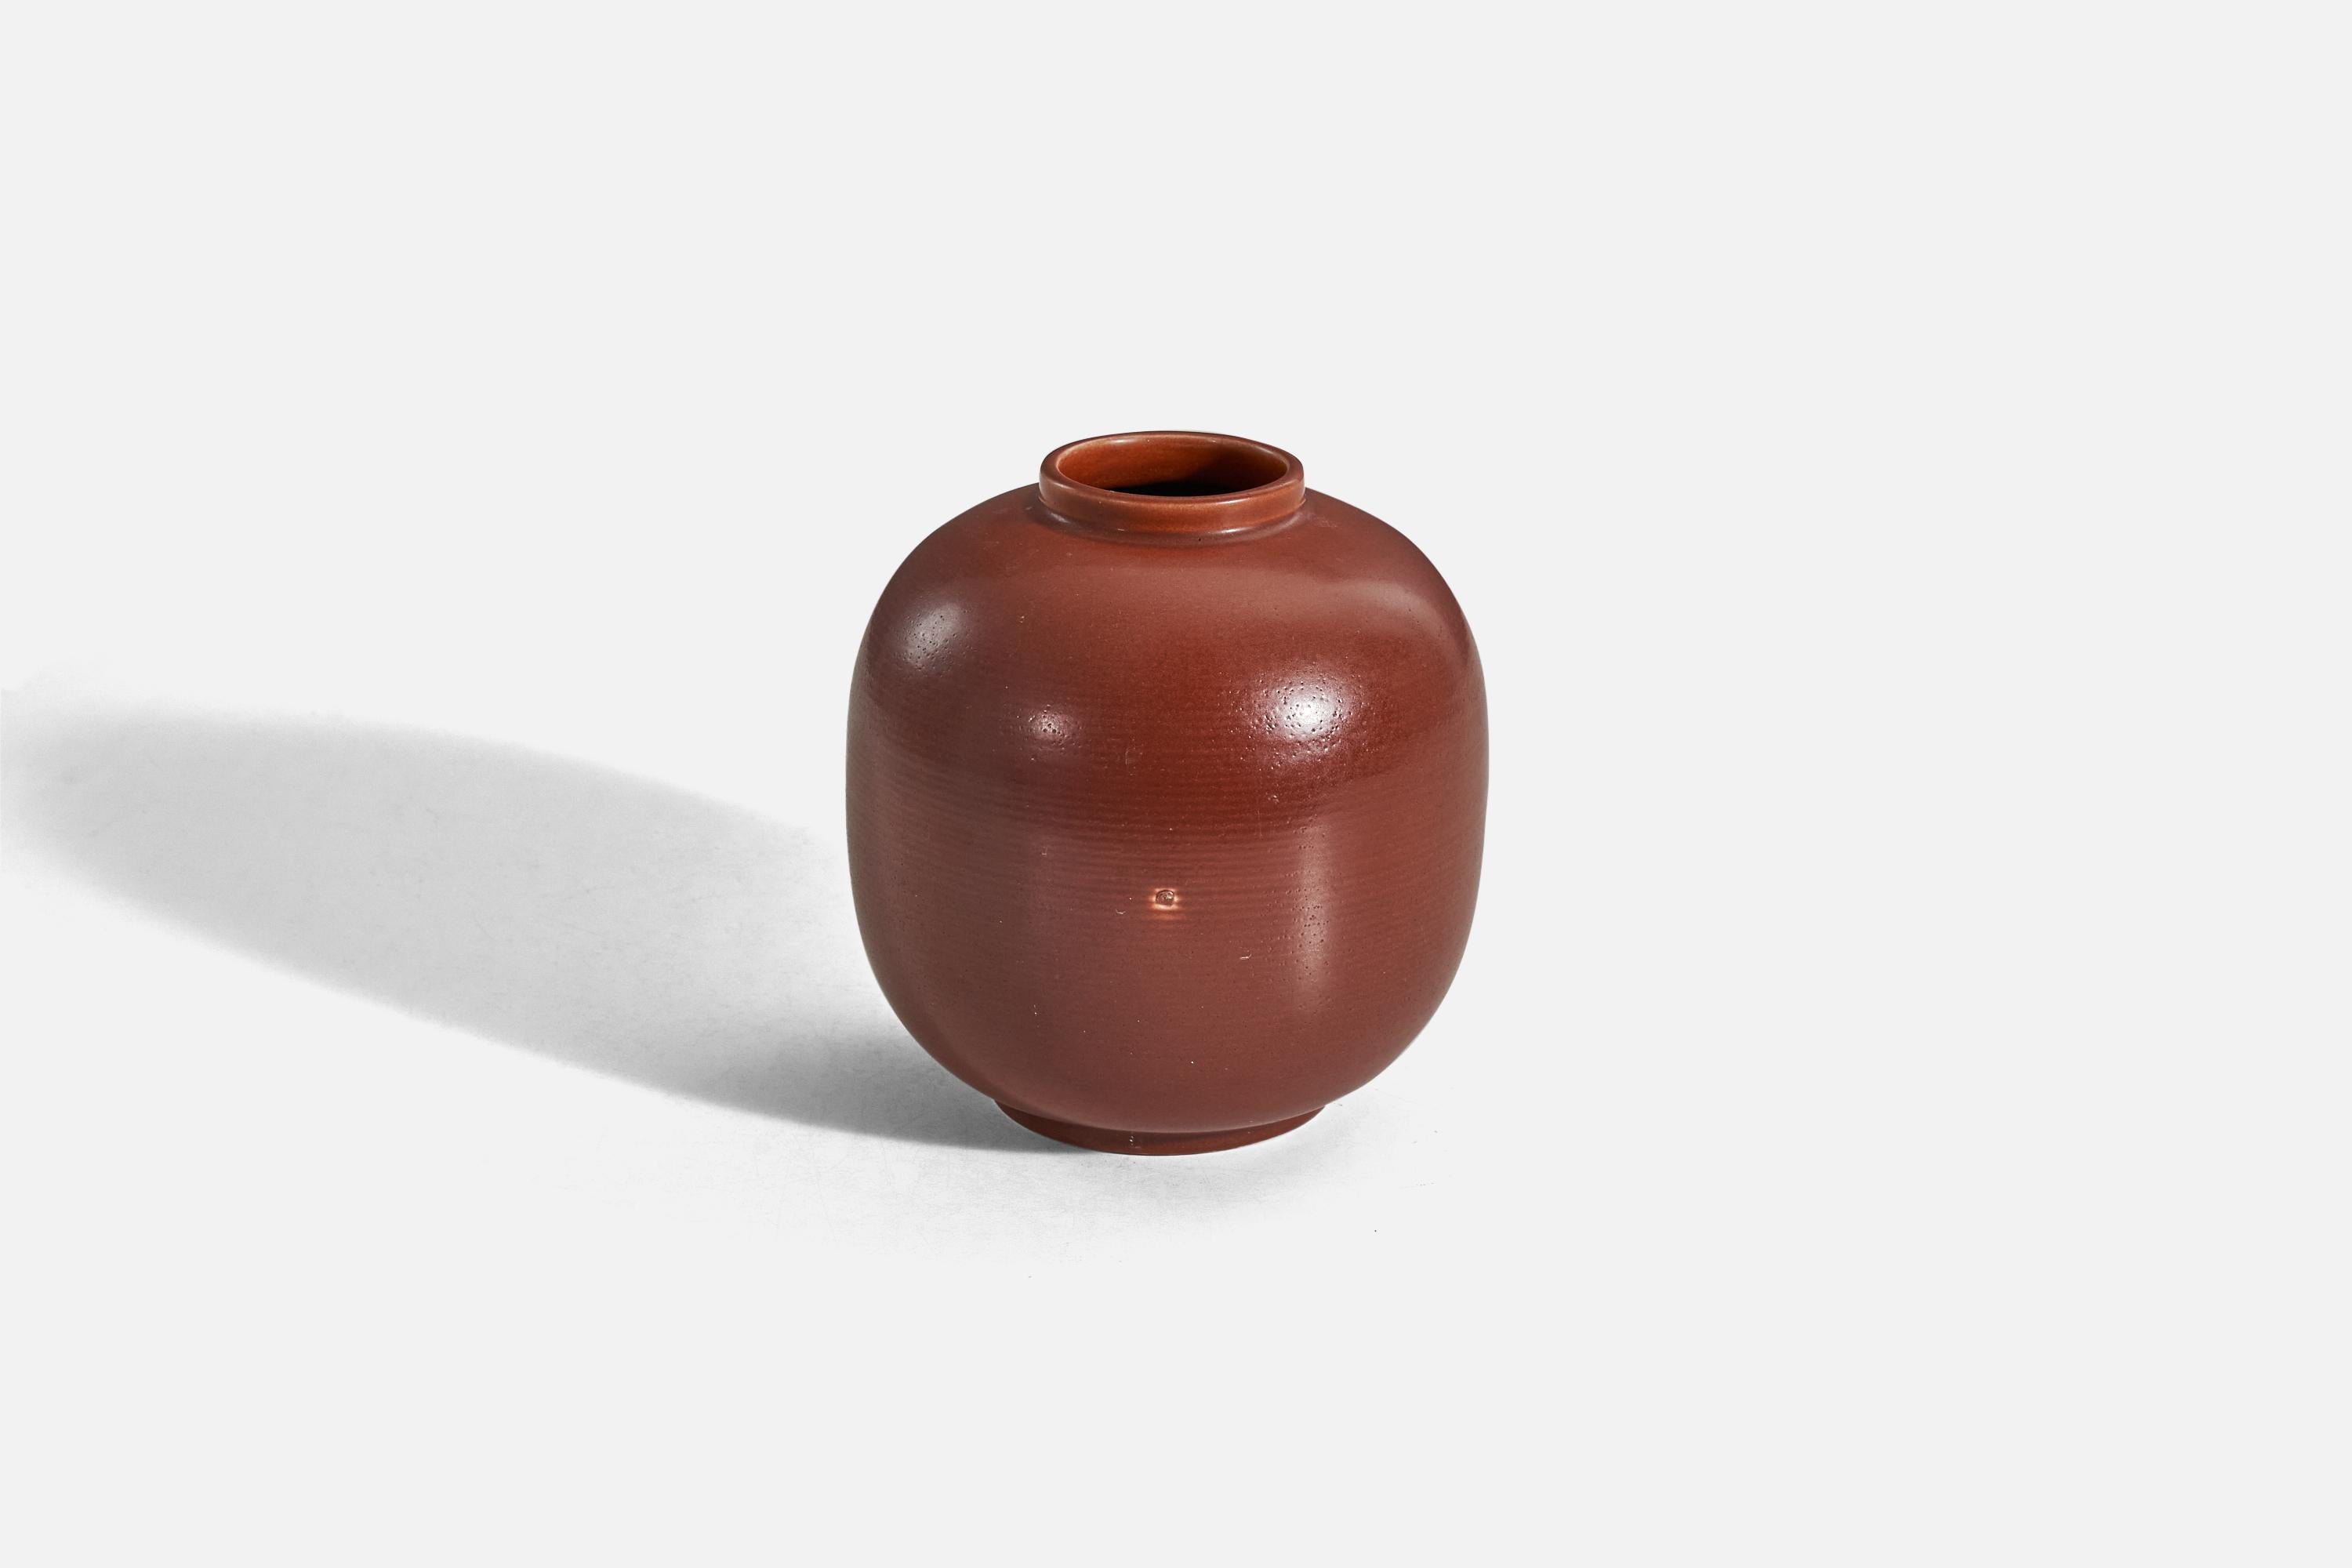 A red, glazed stoneware vase designed and produced in Sweden, c. 1940s.